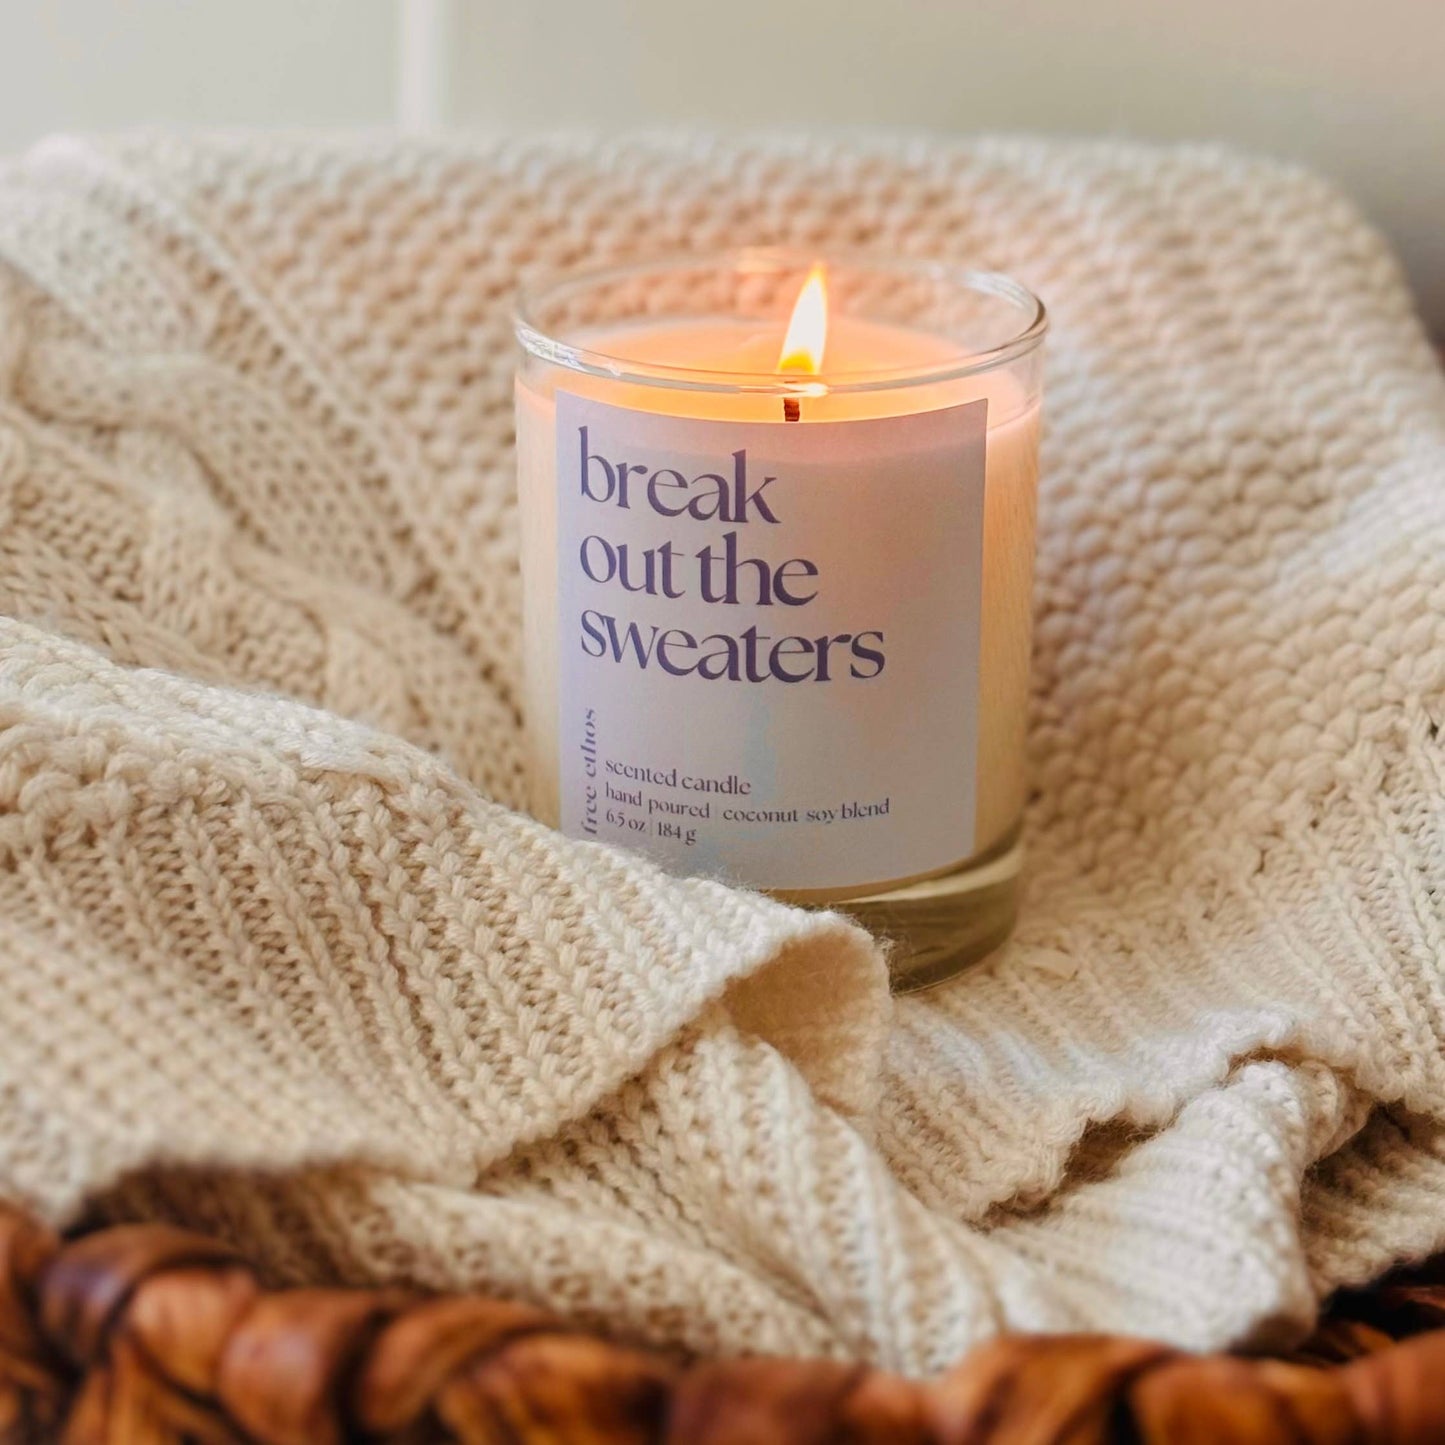 Break out the Sweaters Candle